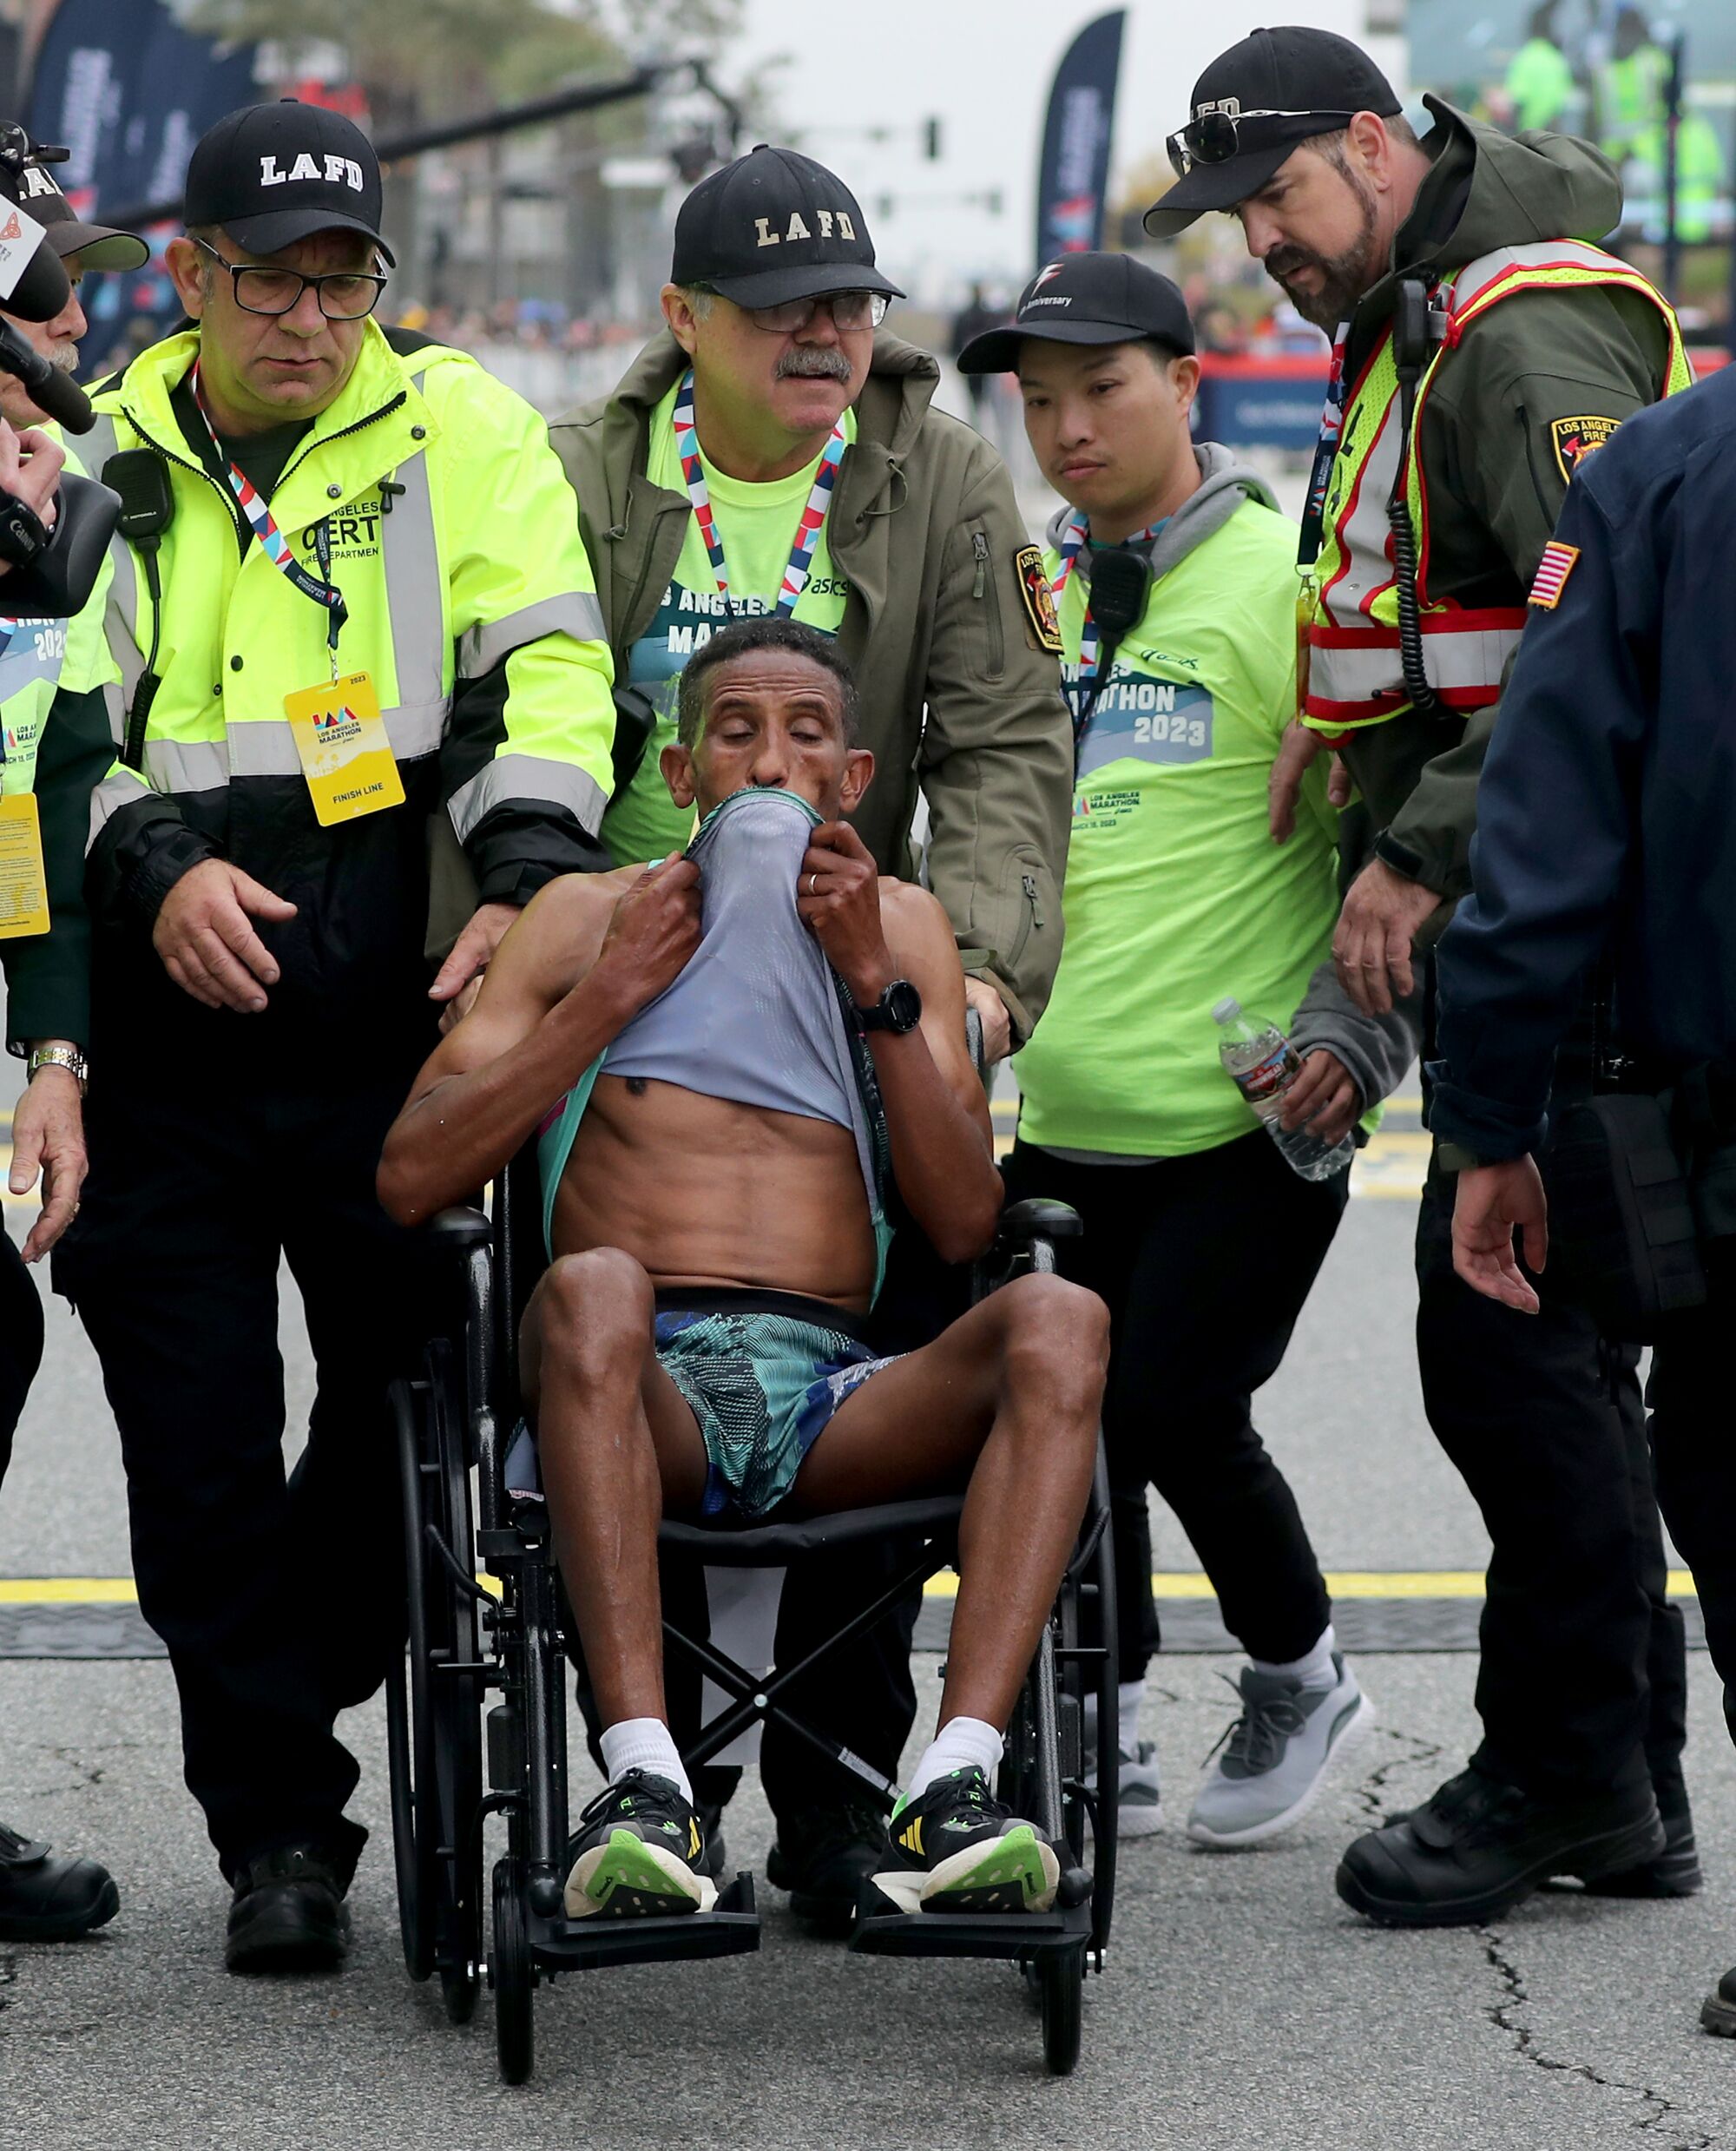 Ethiopia's Yemane Tsegay was carried in a wheelchair after collapsing at the finish line.